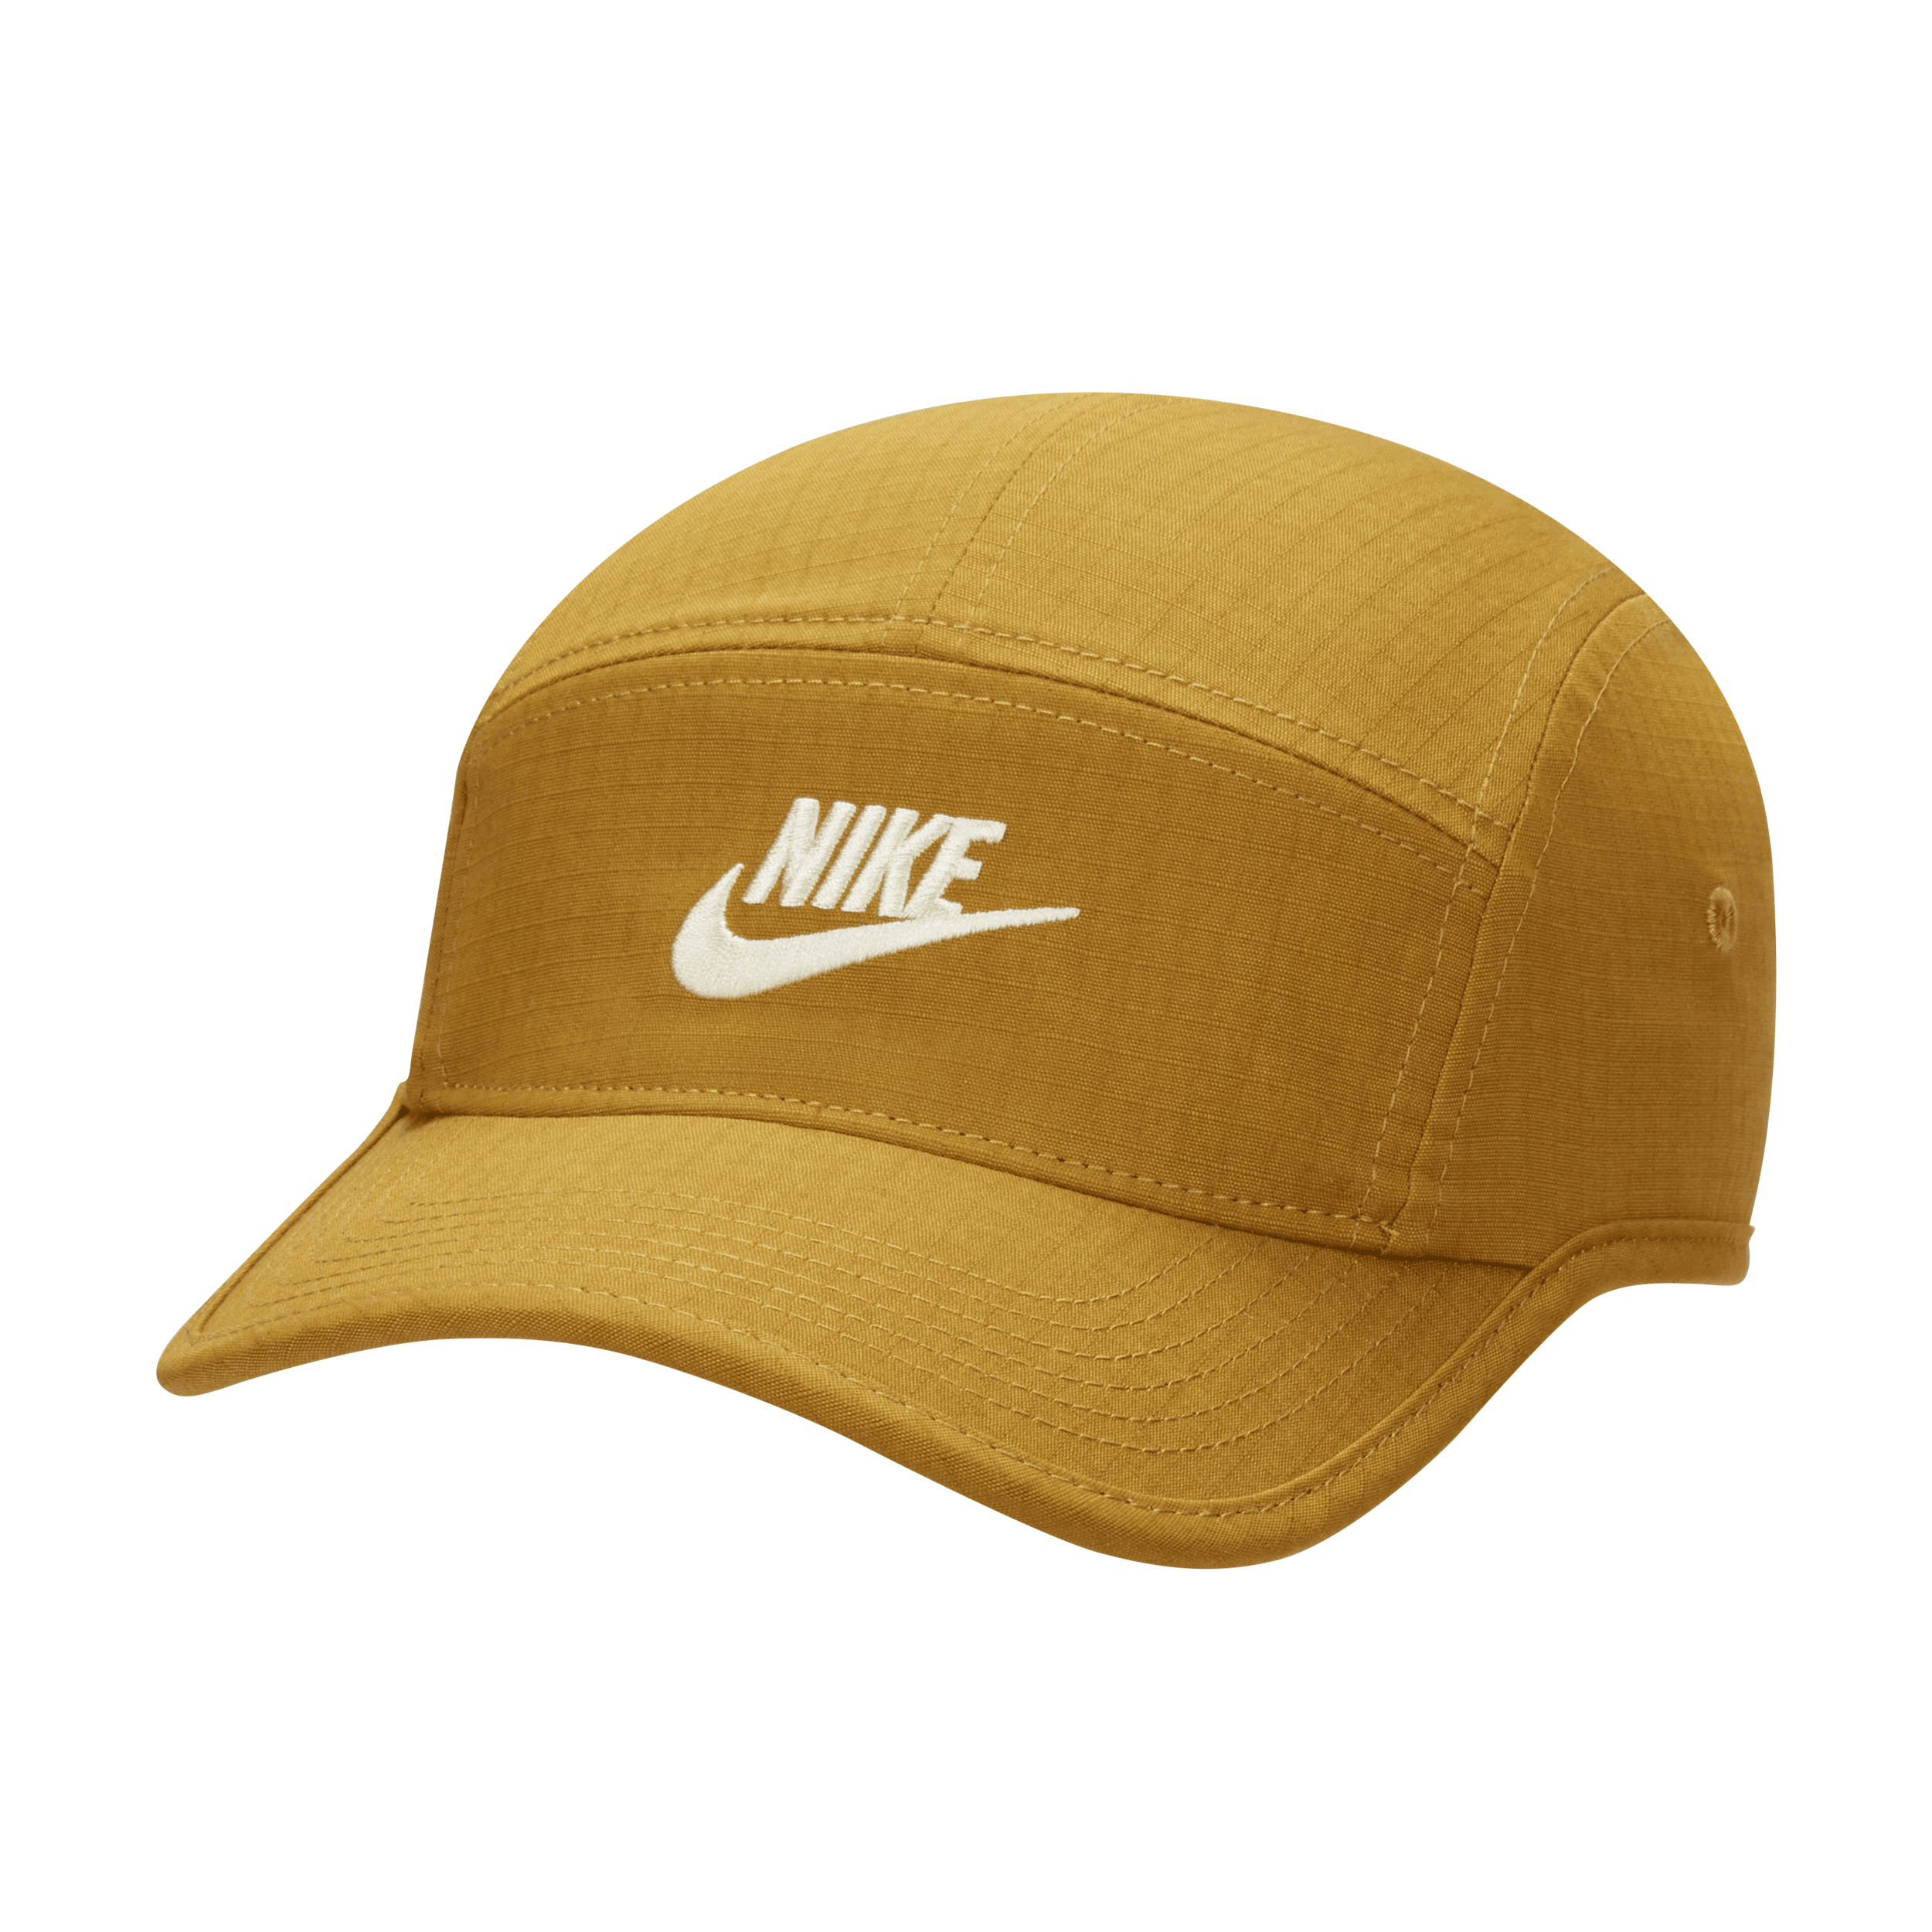 Nike Unisex Fly Unstructured Futura Cap In Brown